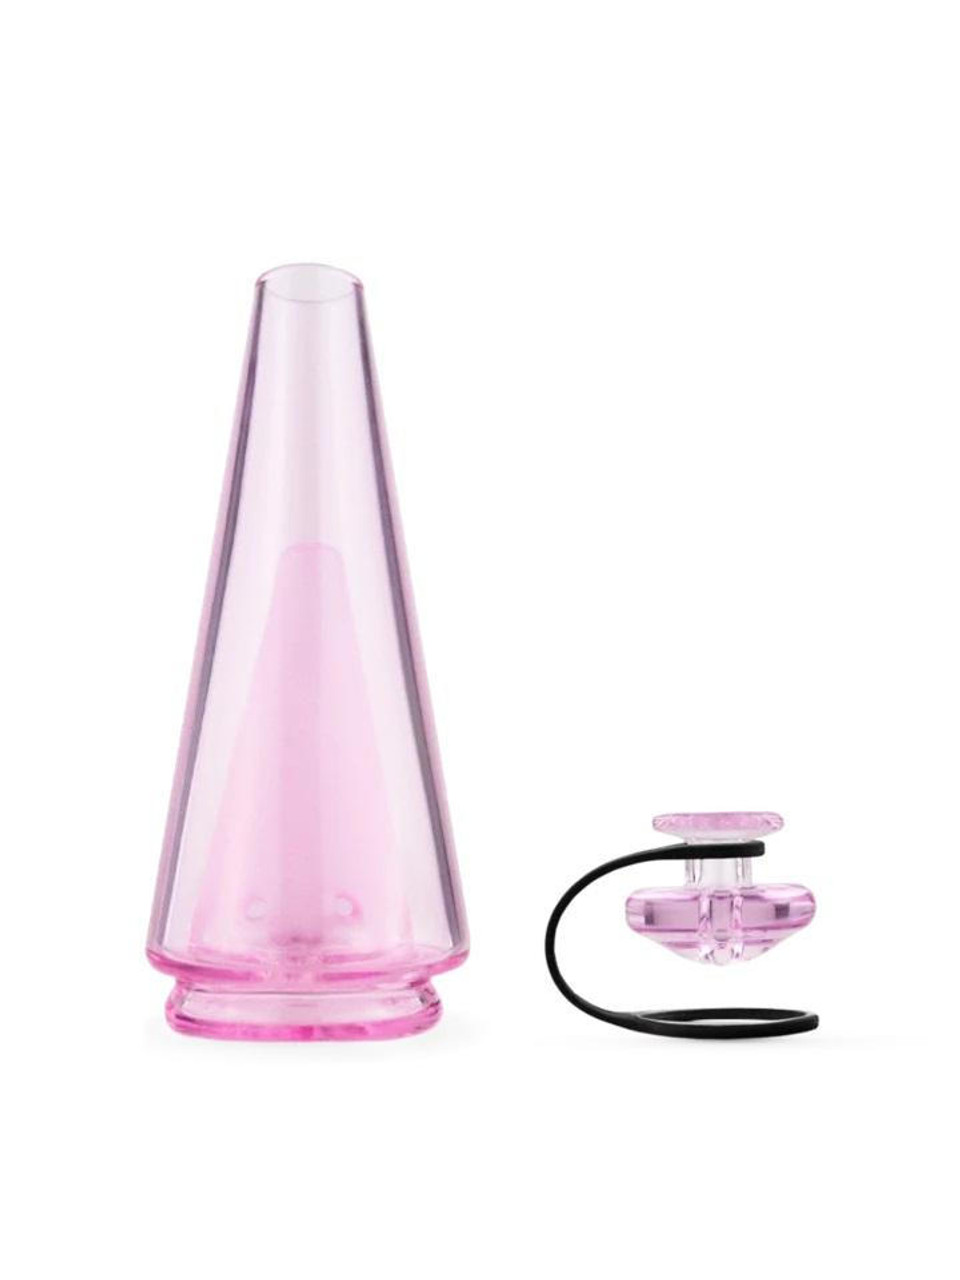 https://cdn11.bigcommerce.com/s-28tw9v9waz/images/stencil/1280x1280/products/515/12560/puffco-the-puffco-peak-replacement-glass-and-colored-carb-cap-and-tether-combo-harlequin-pink__66622.1688337046.jpg?c=1?imbypass=on